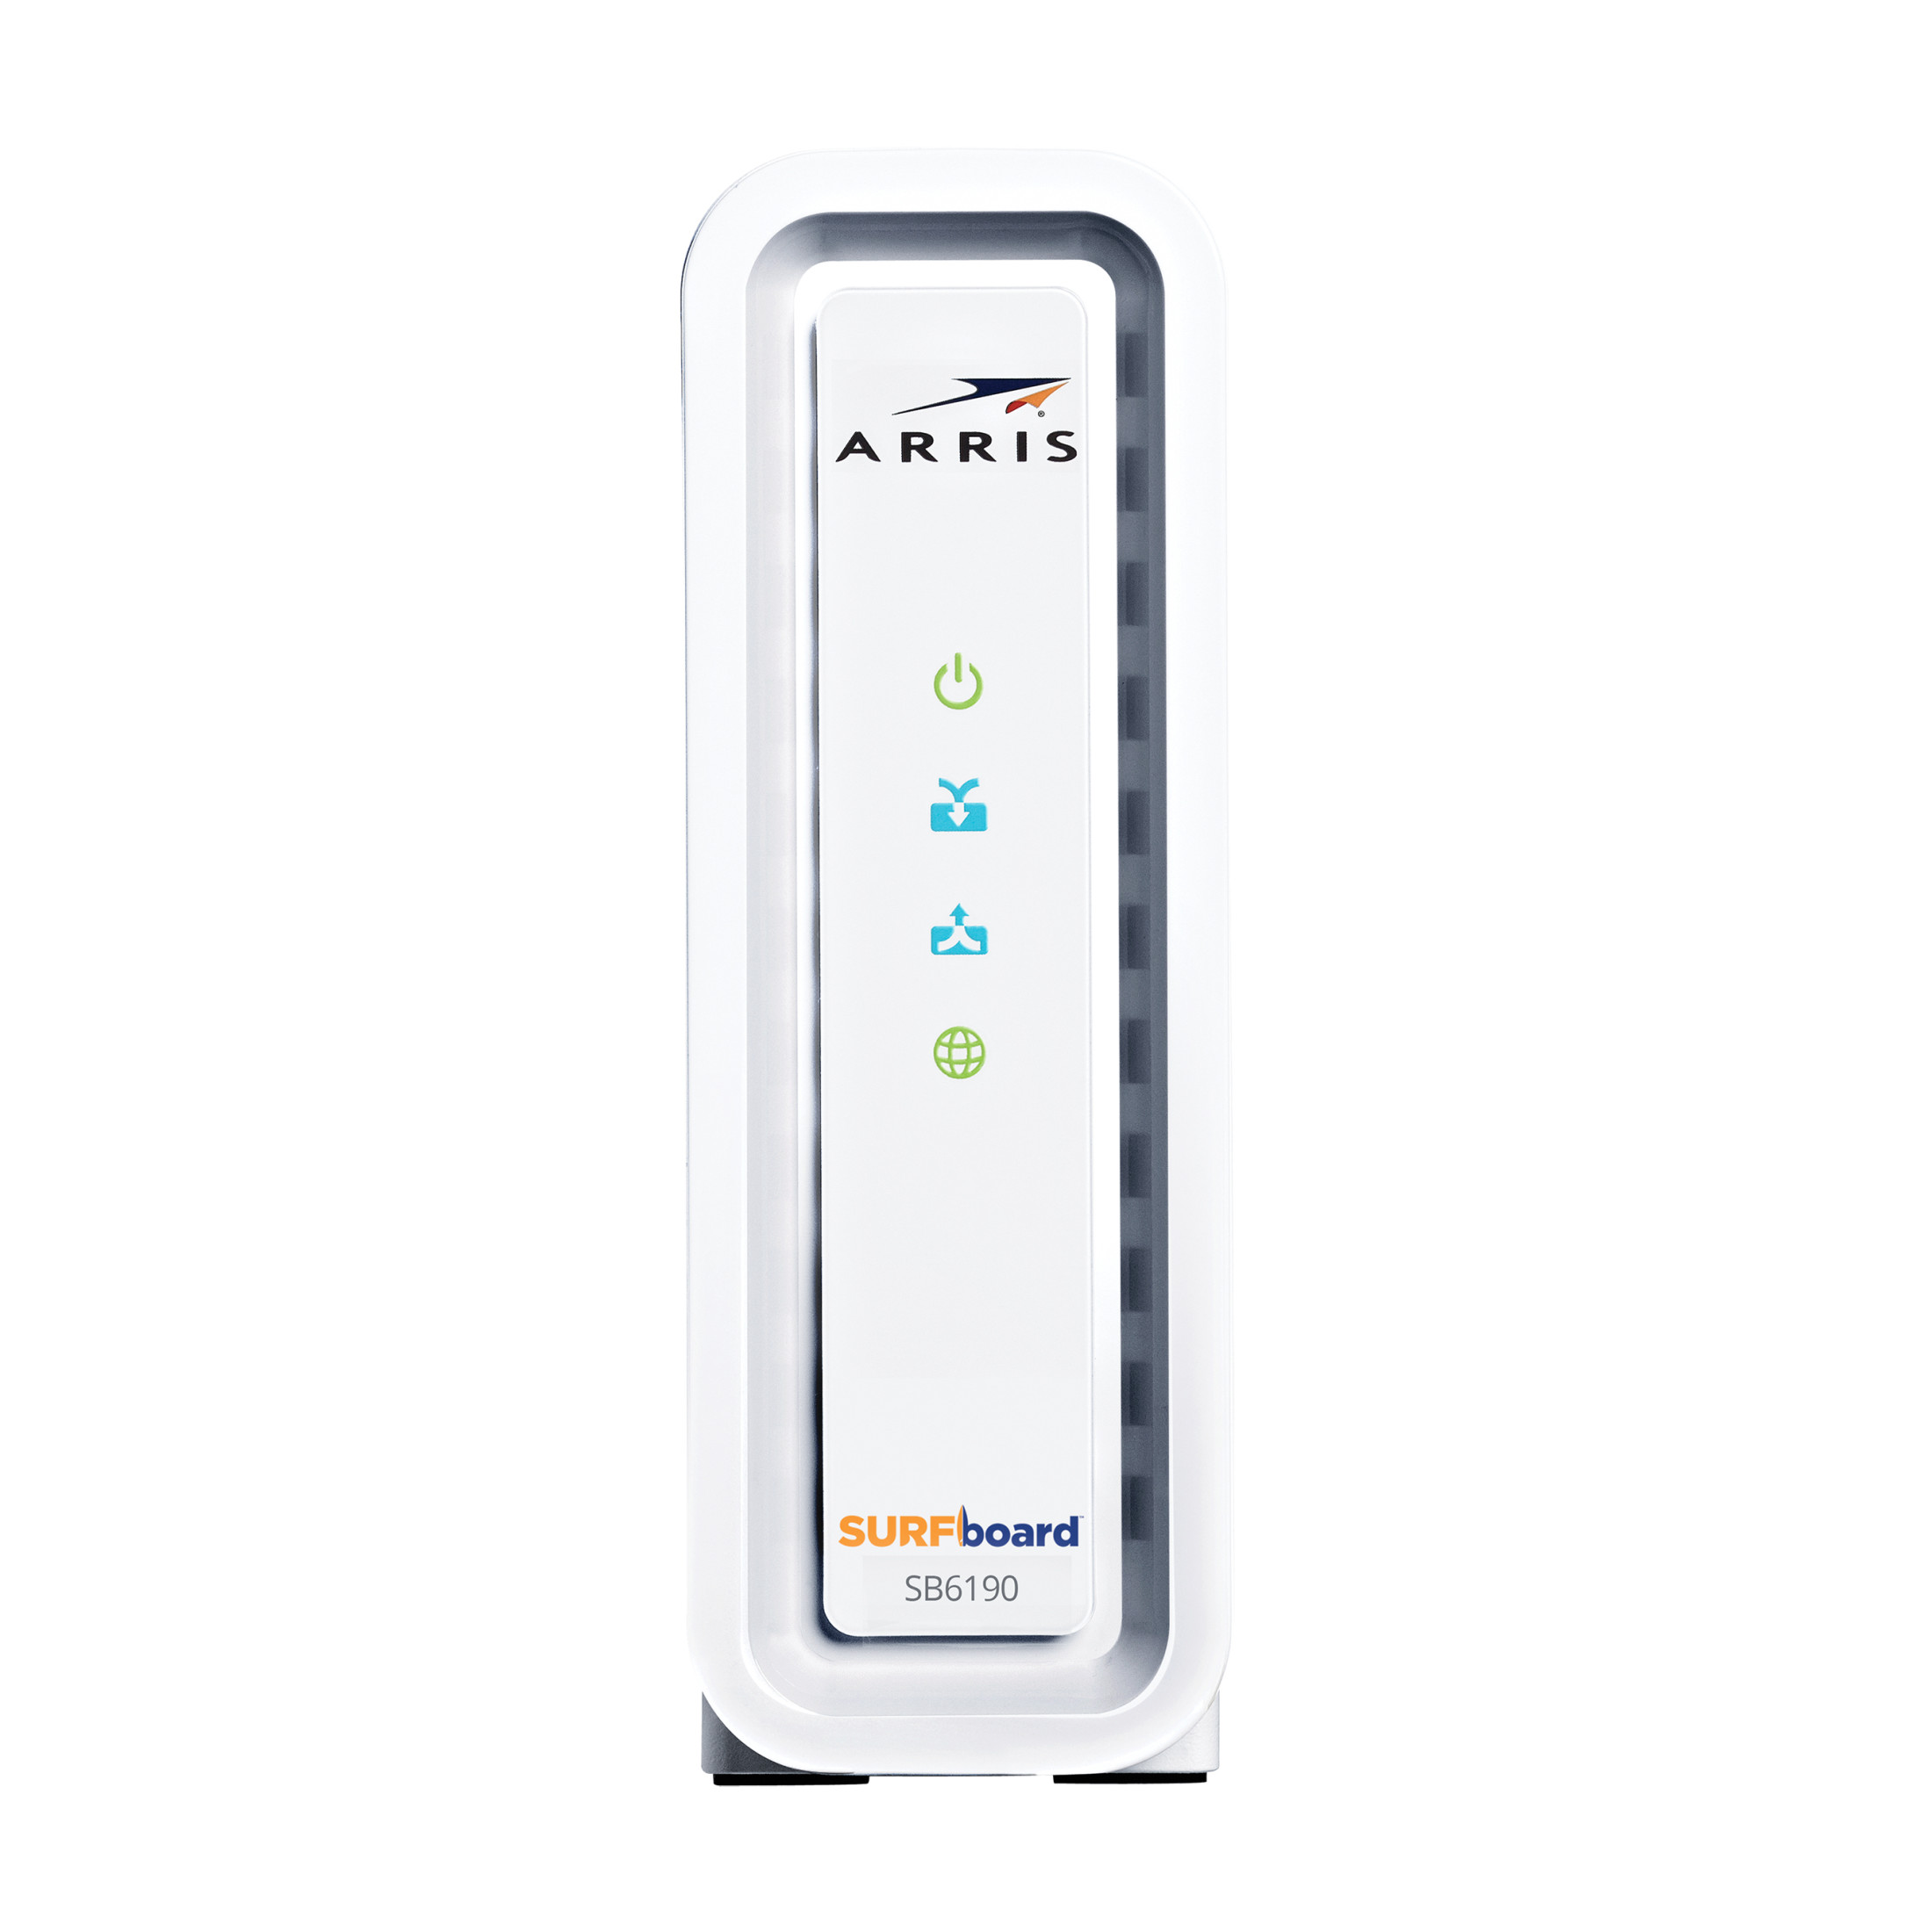 ARRIS Surfboard (32x8) Cable Modem, DOCSIS 3.0 - New Condition - image 1 of 7